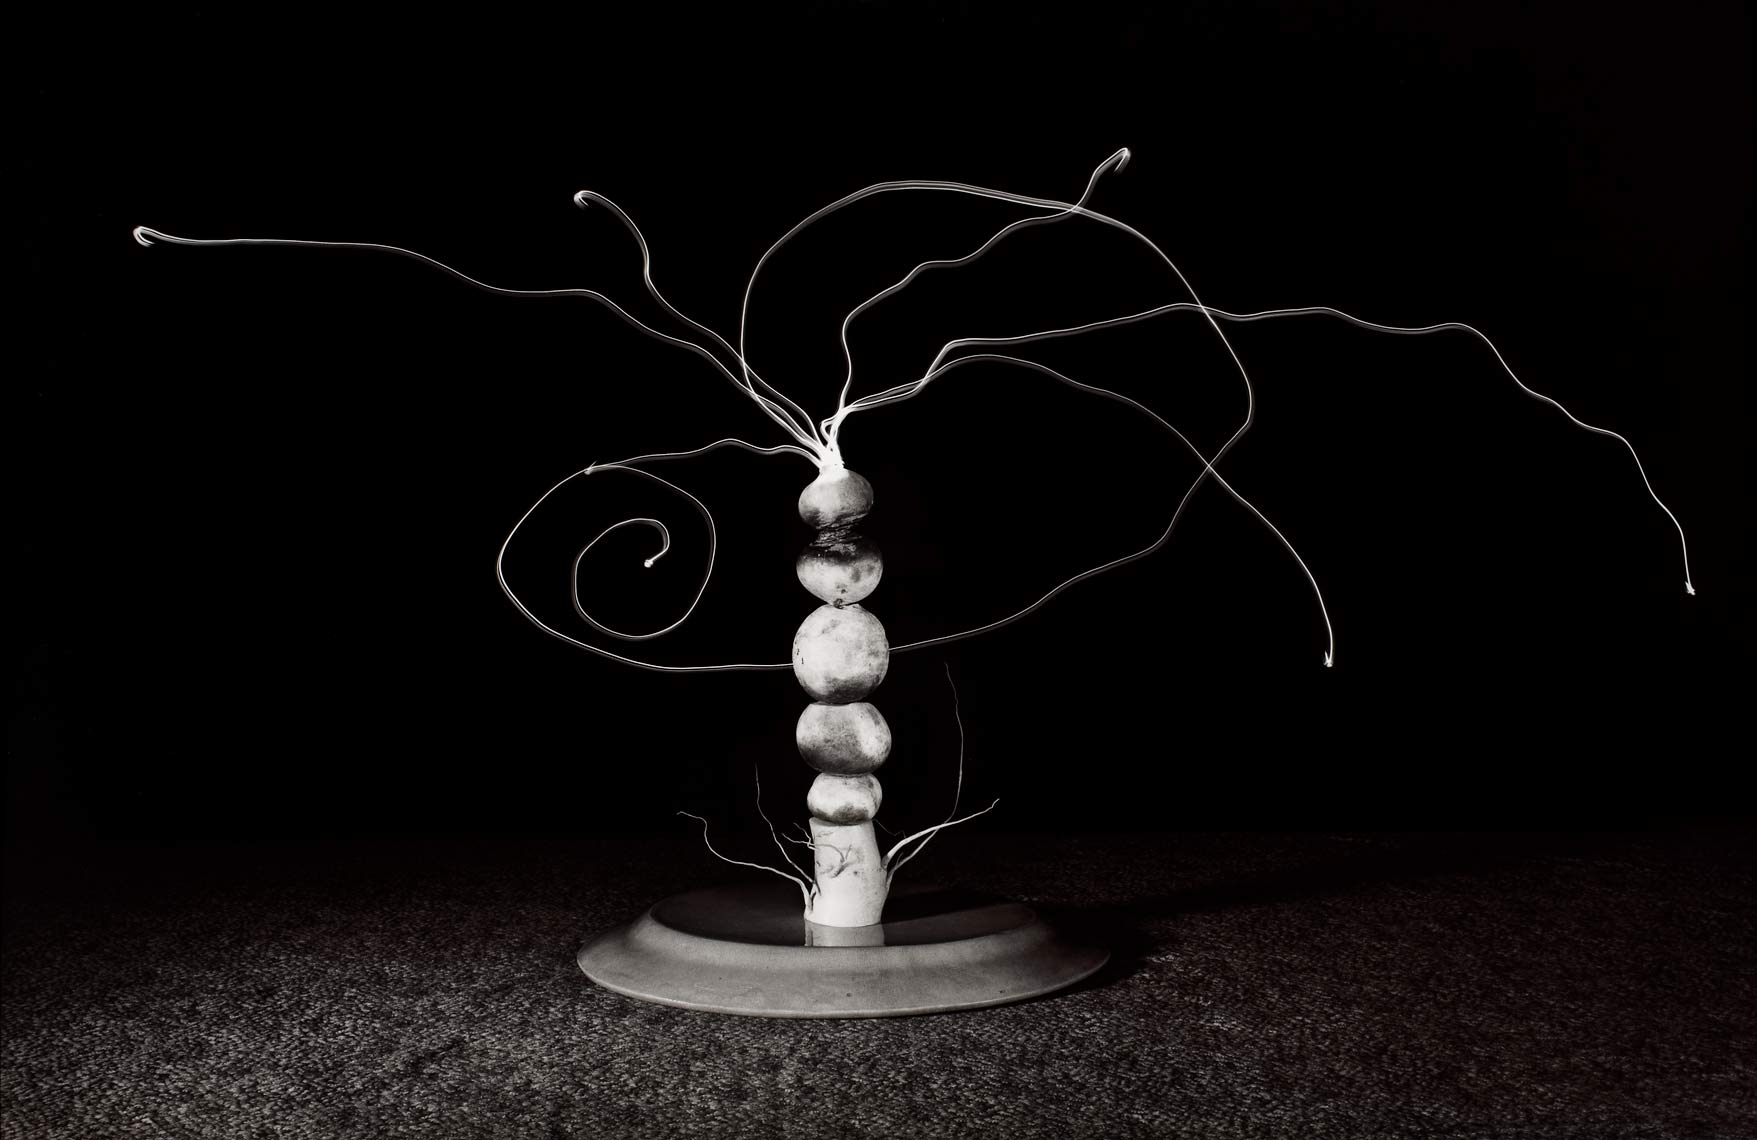 David Lebe; Food For Thought- 15, 1992, light drawing, black and white photograph